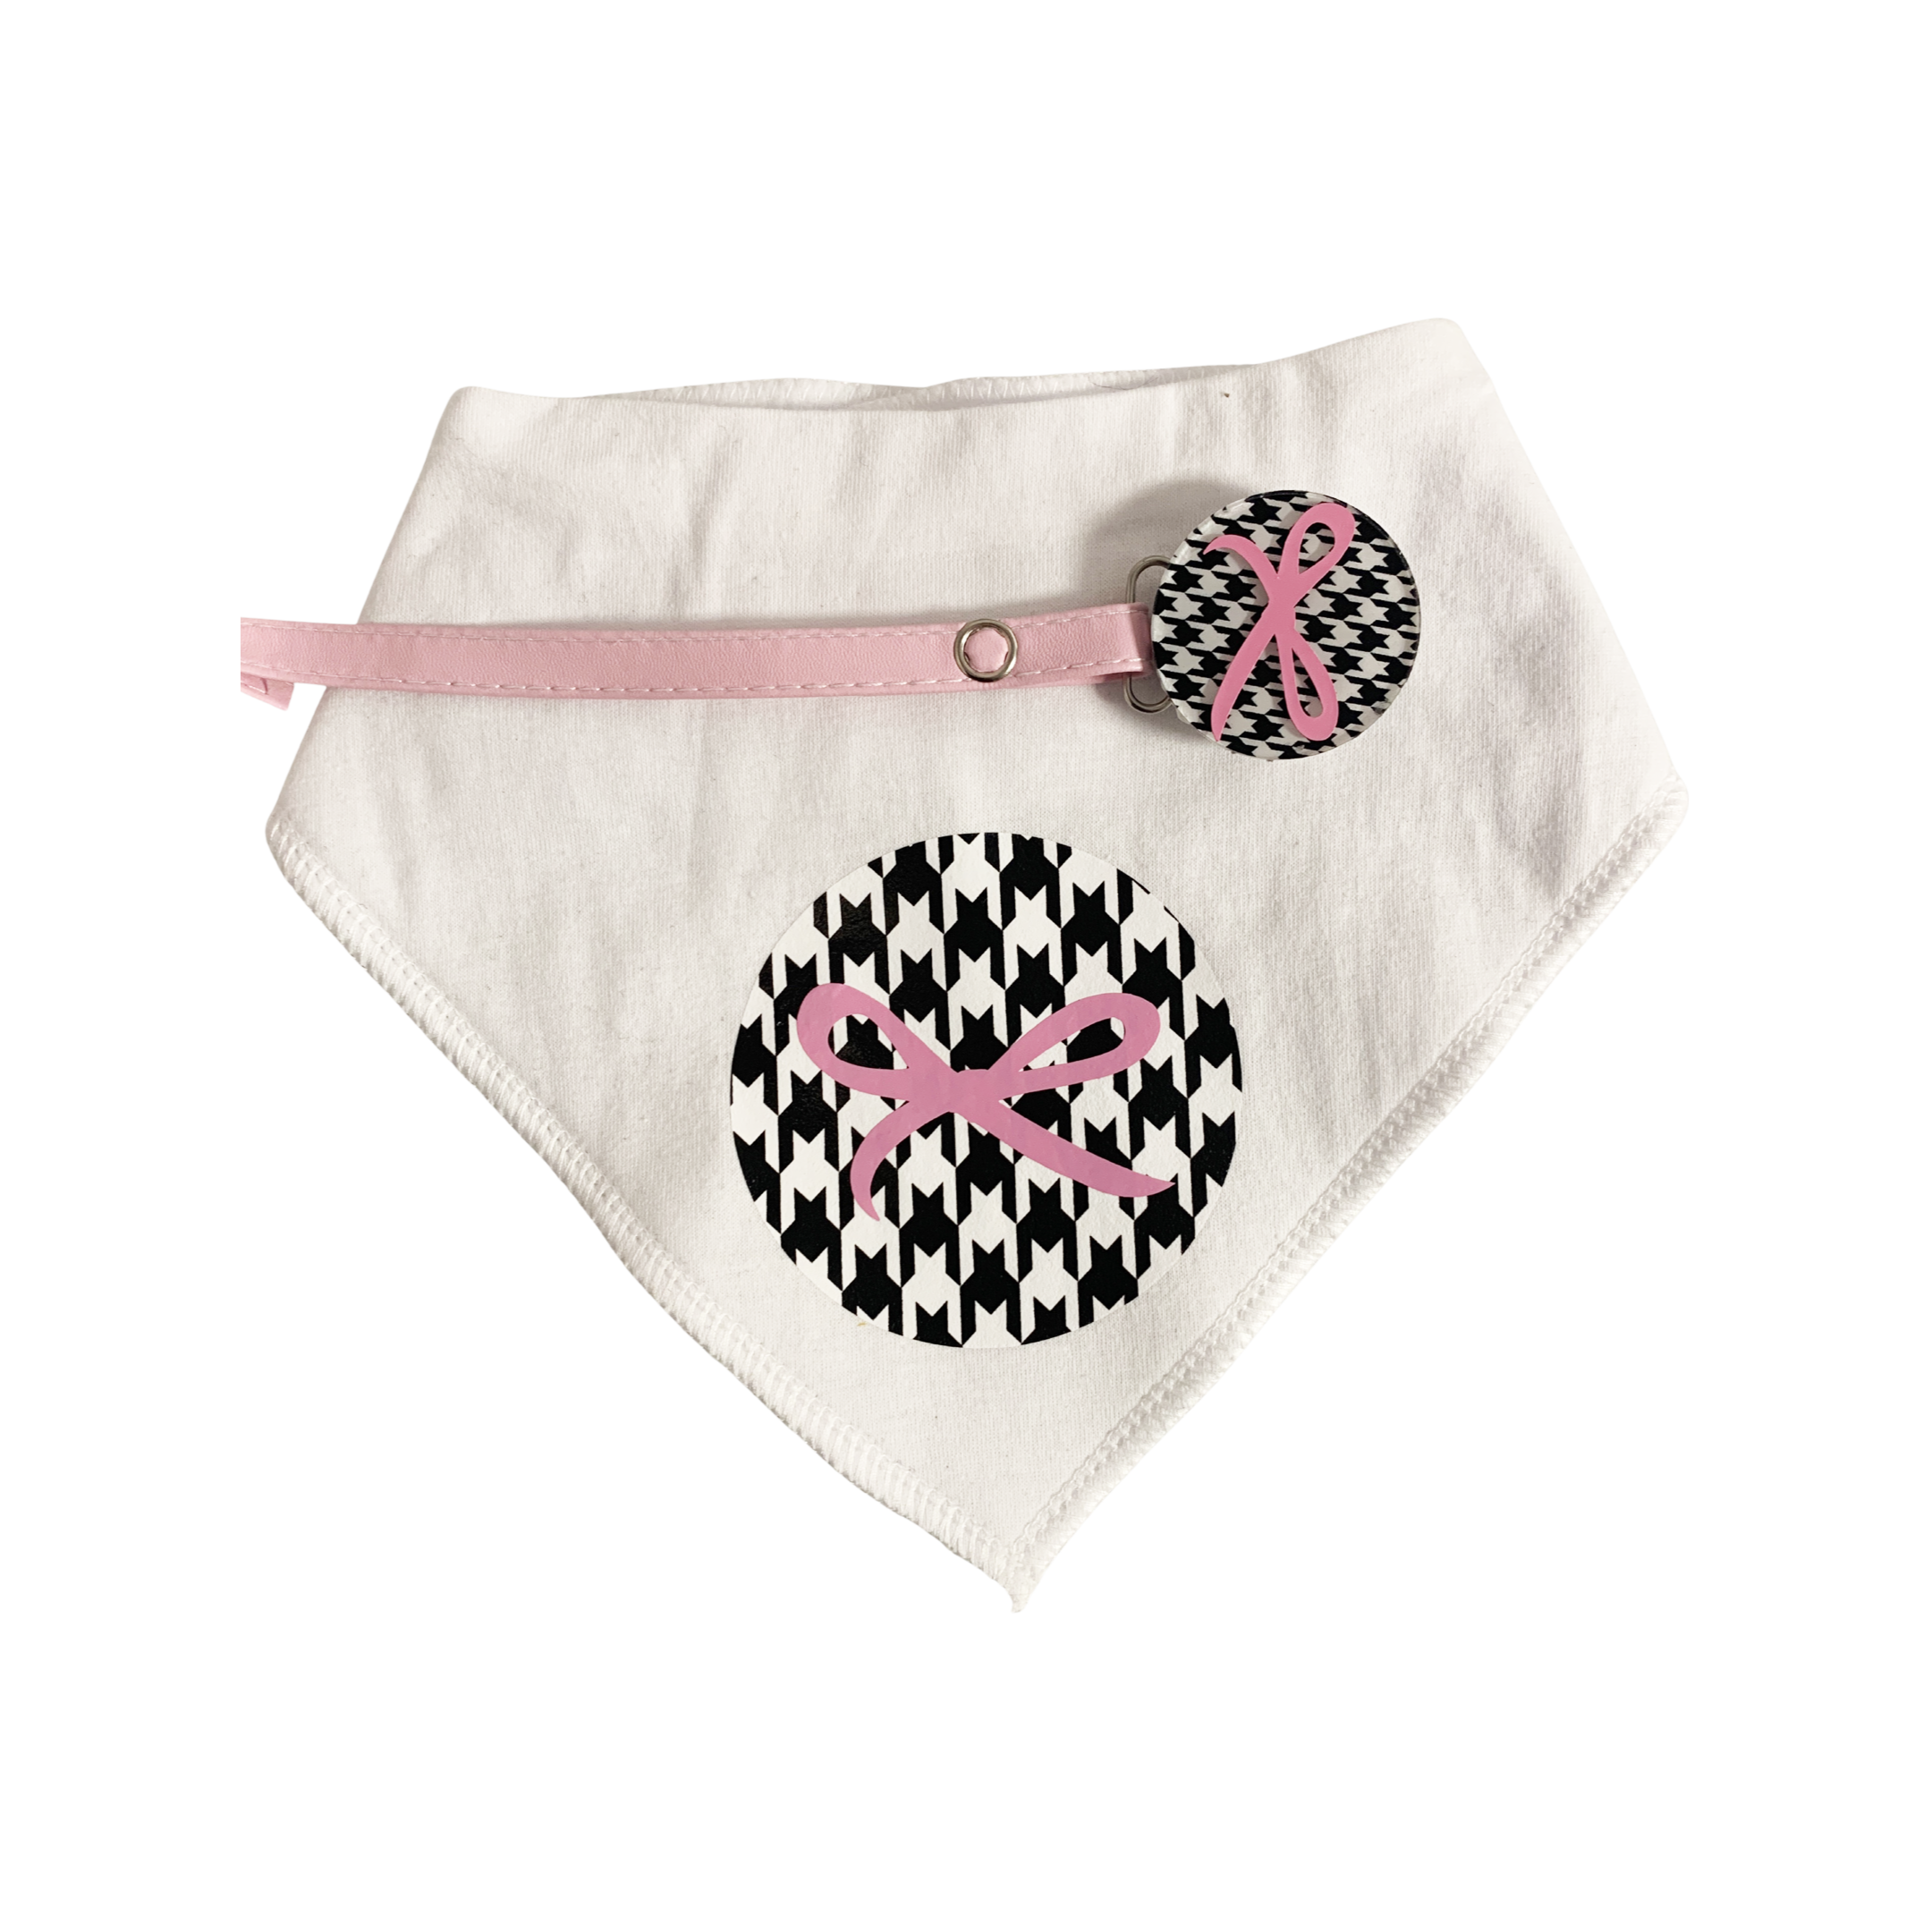 Houndstooth black, white with pink bow bib and clip GIFT SET